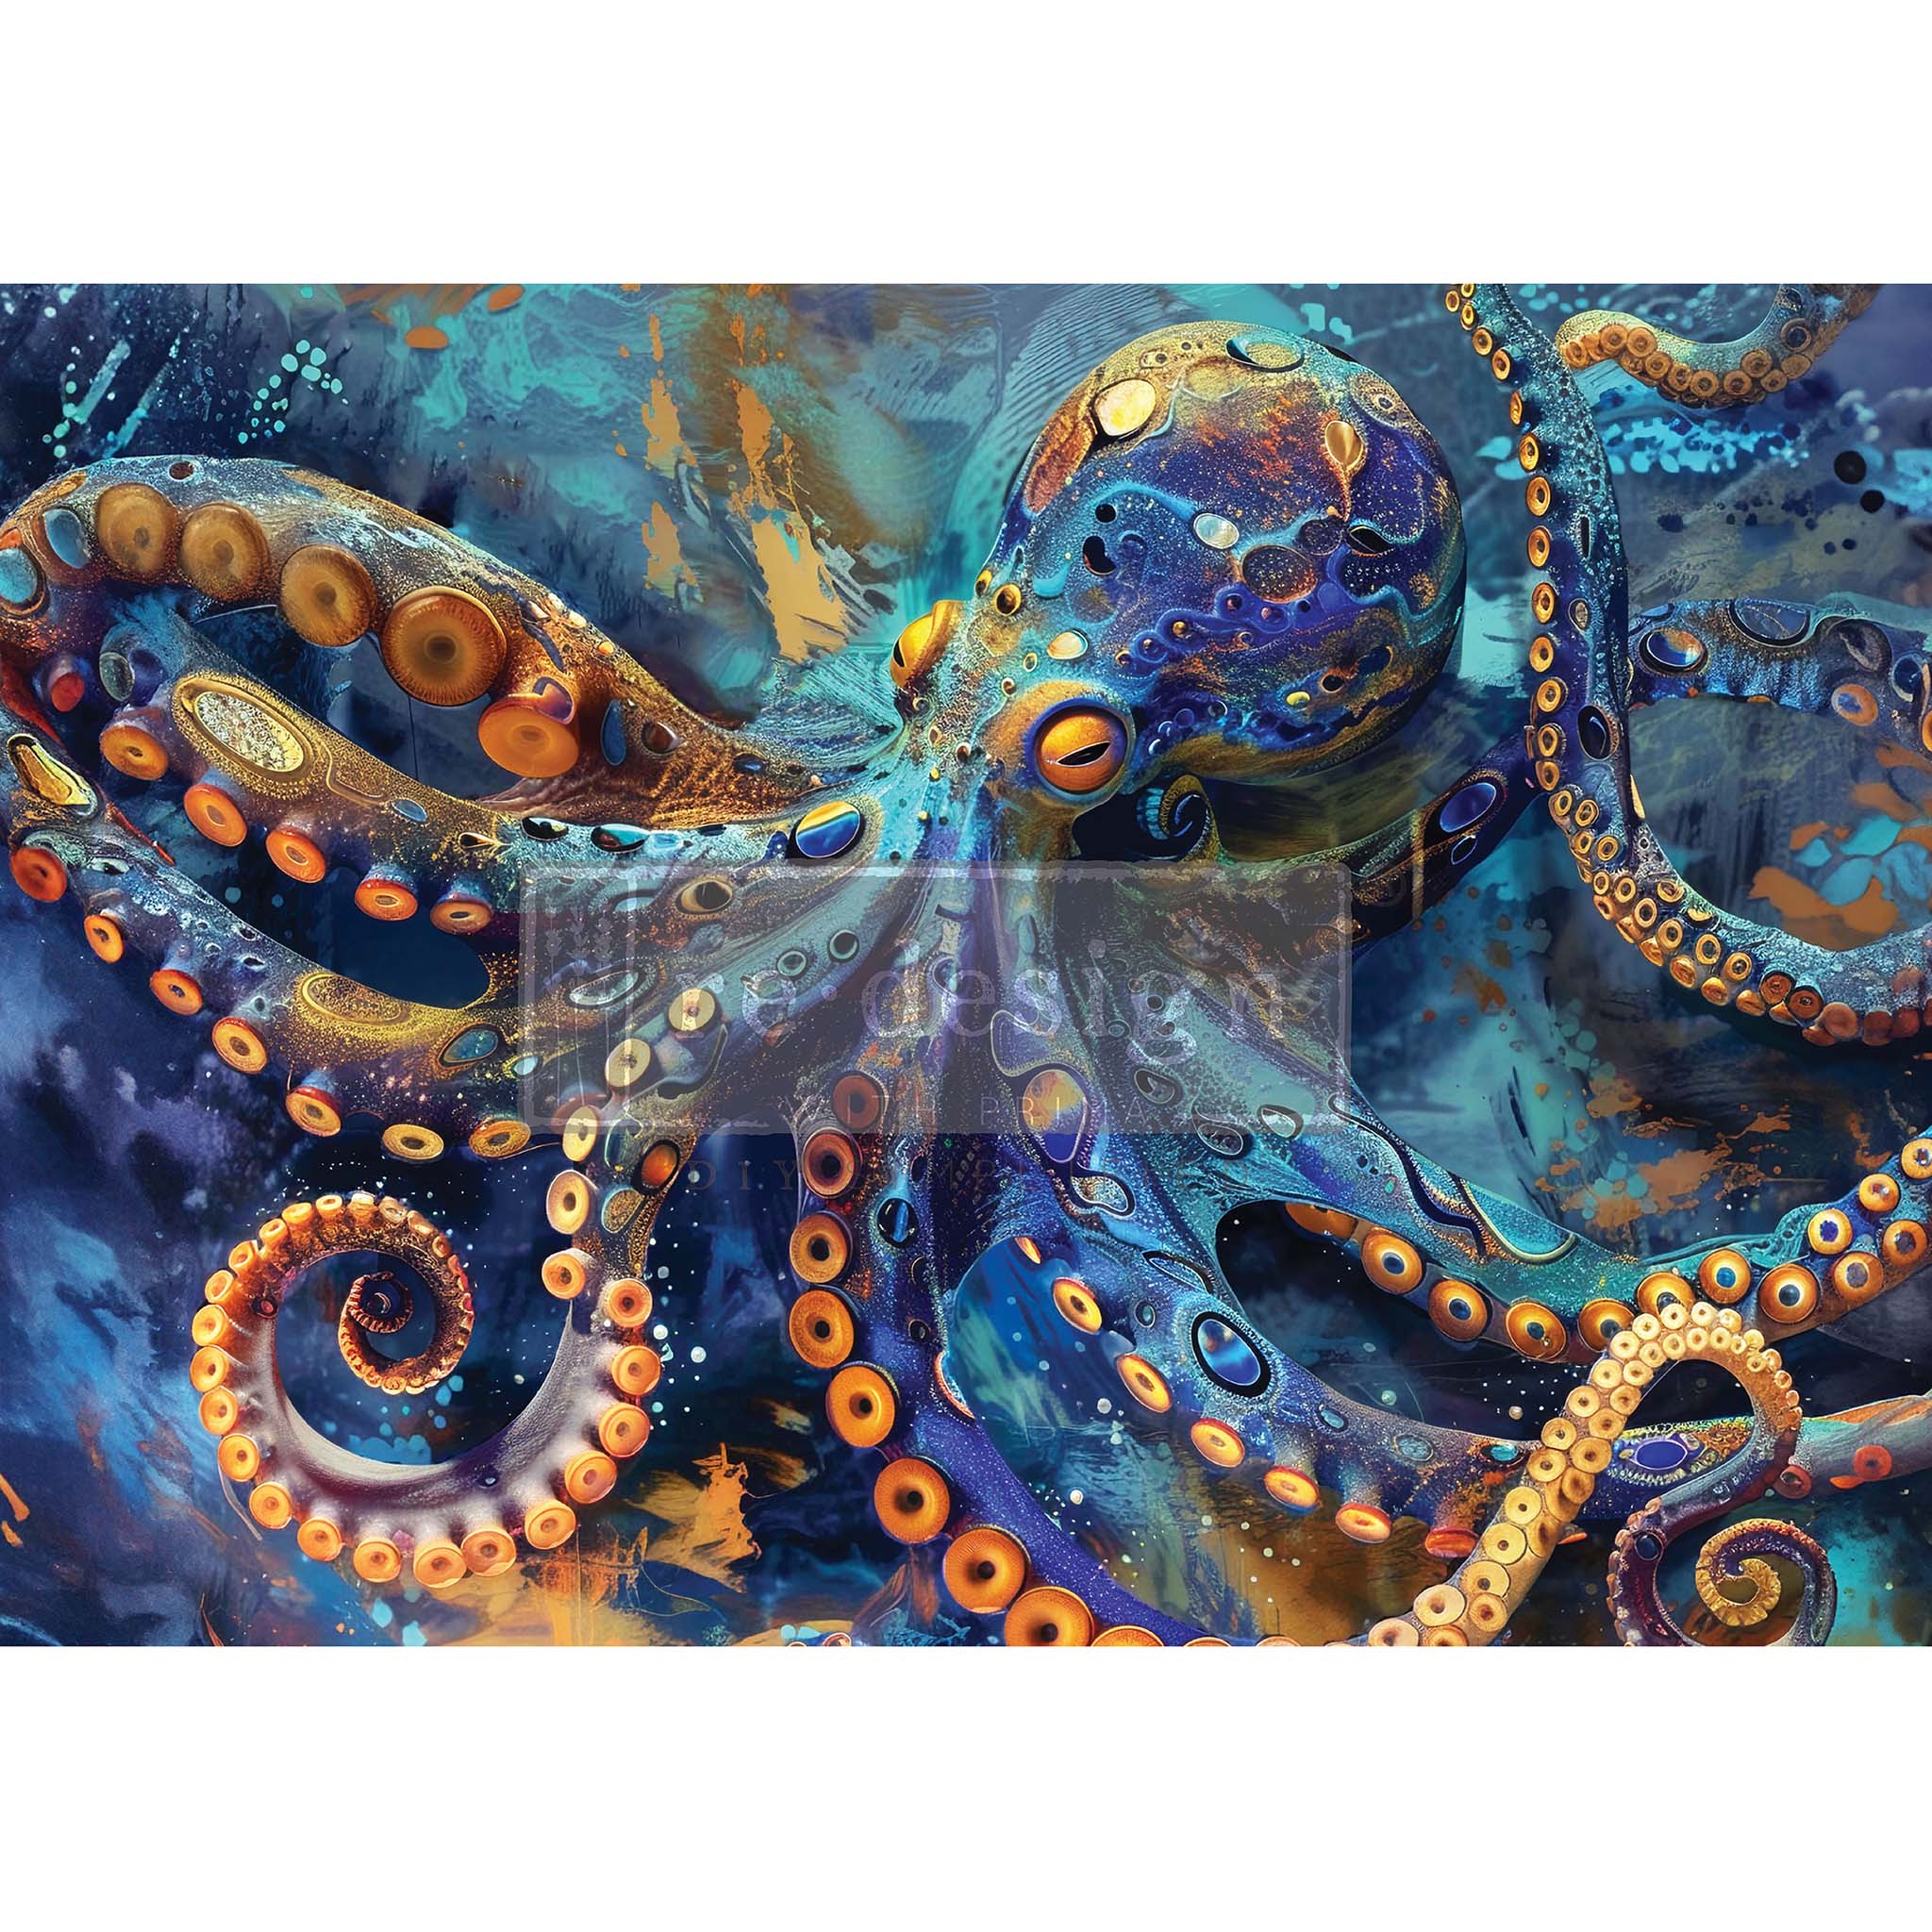 A1 fiber tissue paper featuring a bold colored octopus adorned with steampunk cogs and gears. White borders are on the top and bottom.